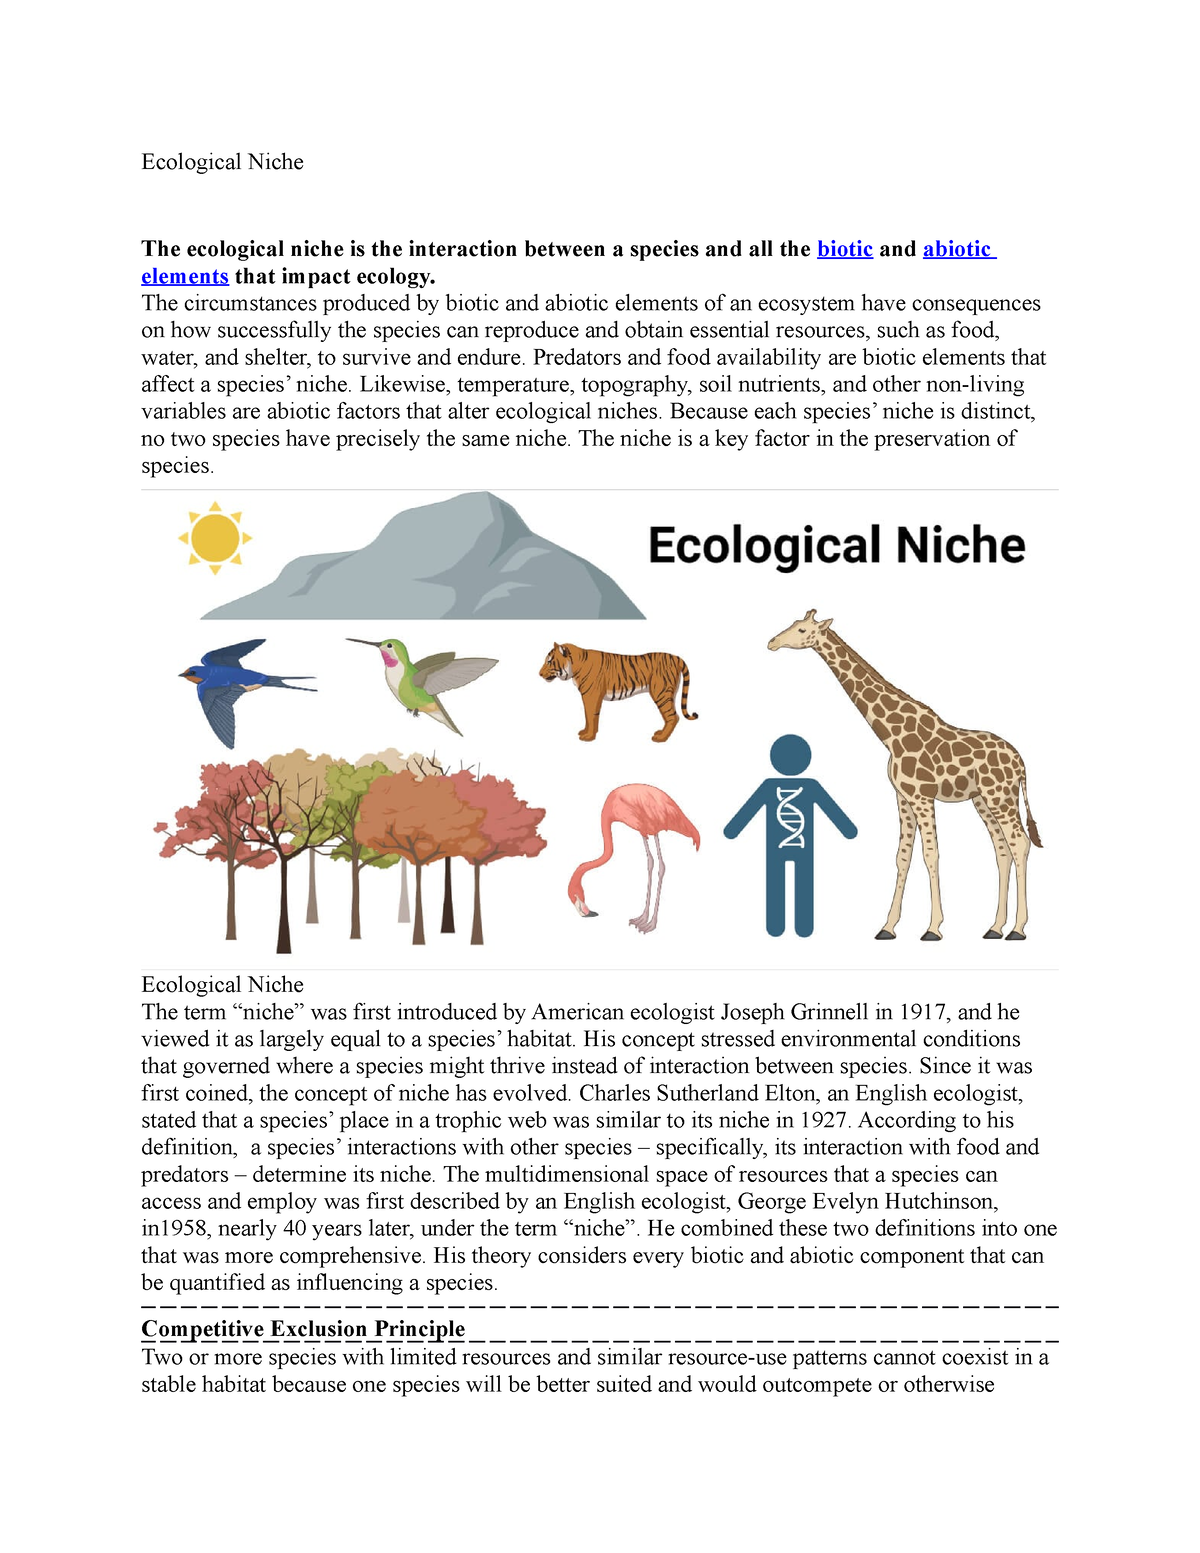 write an essay on ecological niche